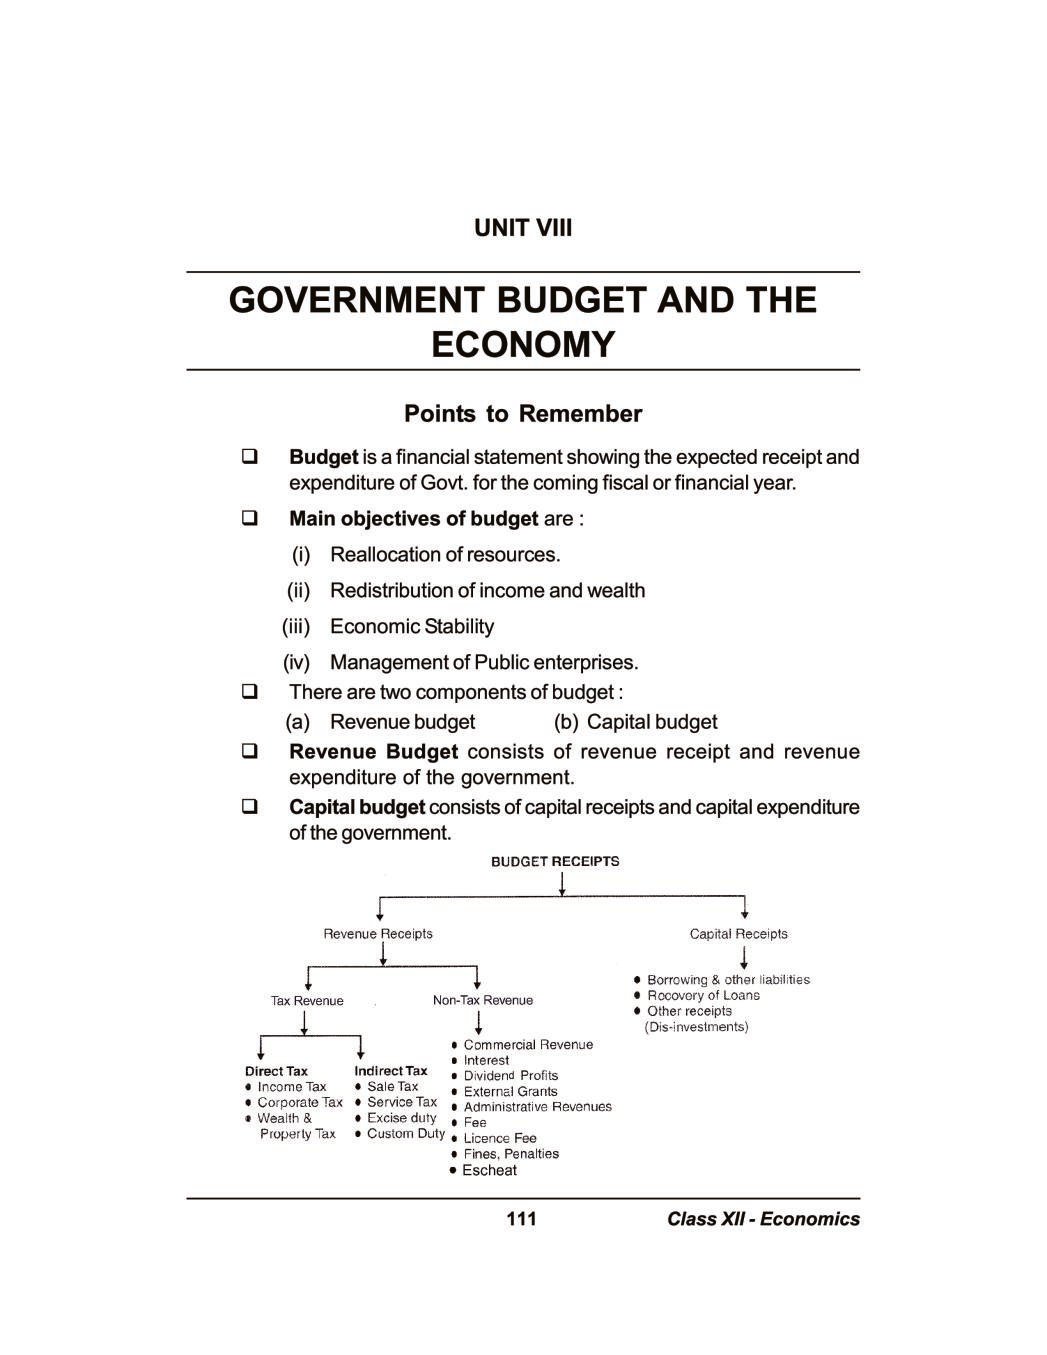 Class 12 Economics Notes for Government Budget and the Economy